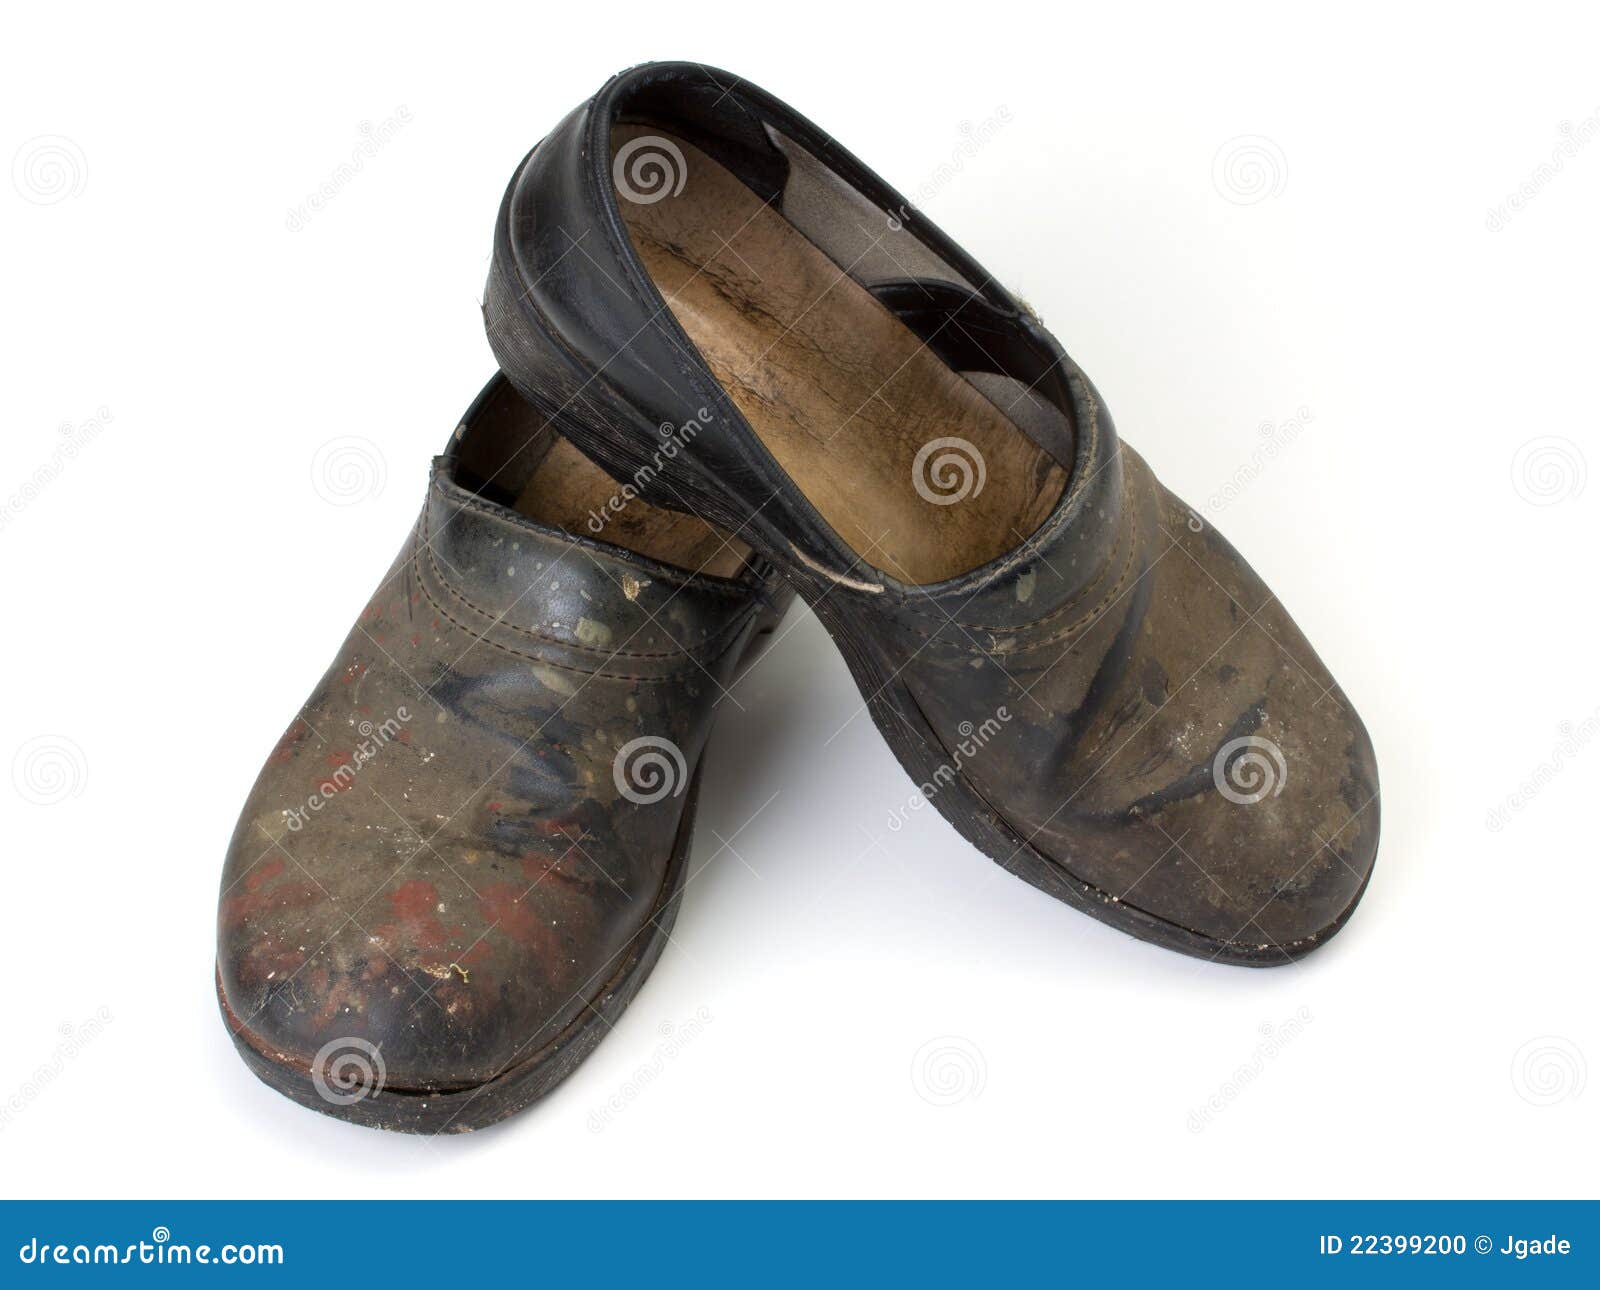 Worn out clogs stock photo. Image of shoe, footwear, white - 22399200